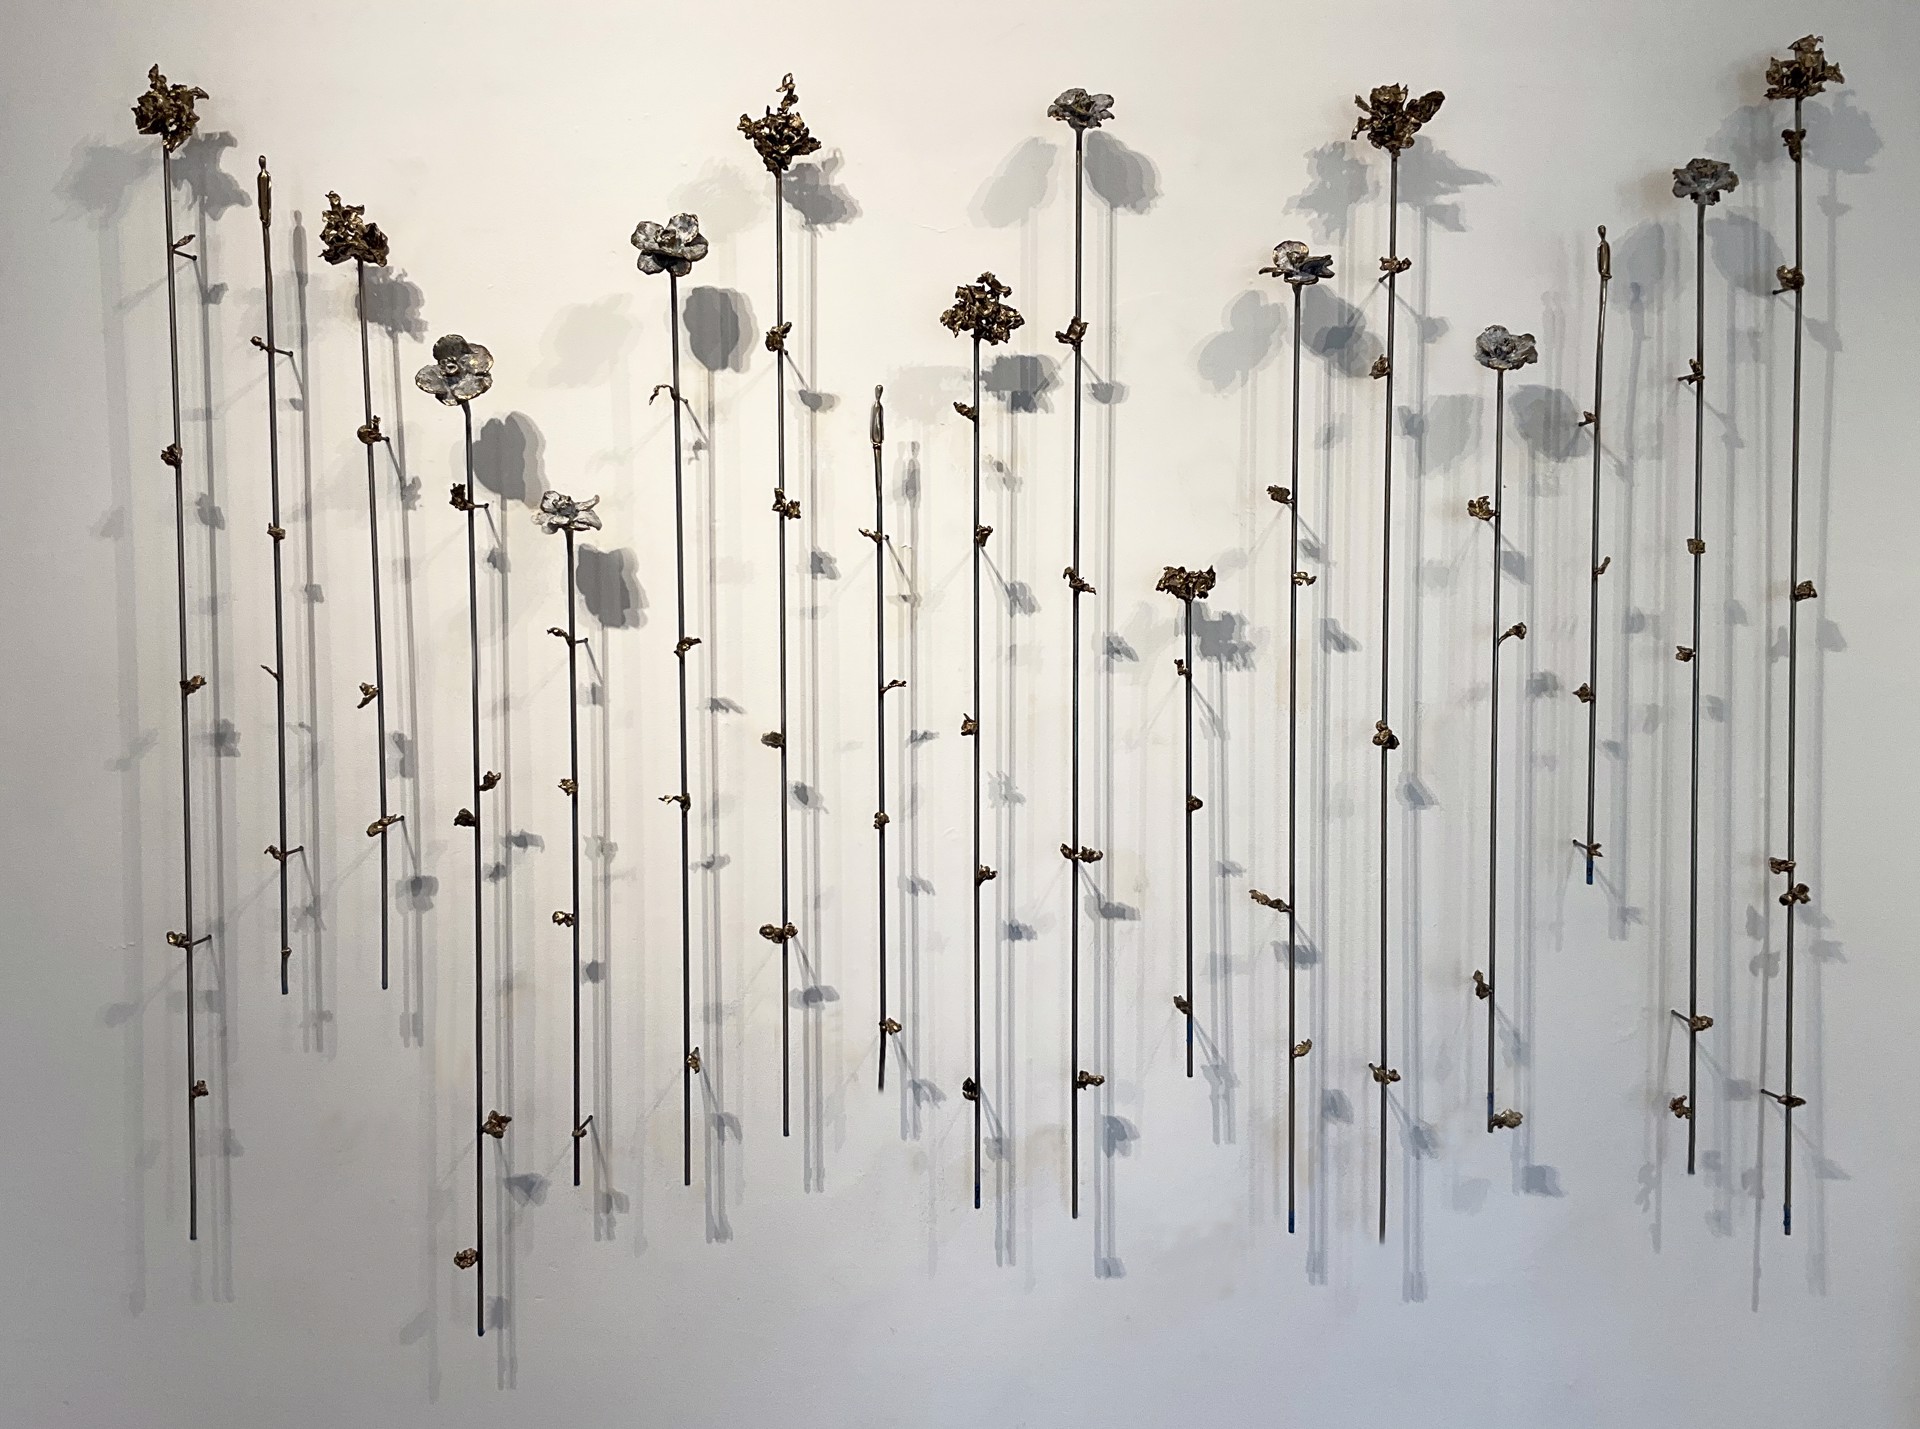 A wall sculpture of individually mounted bronze and steel flowers and figures